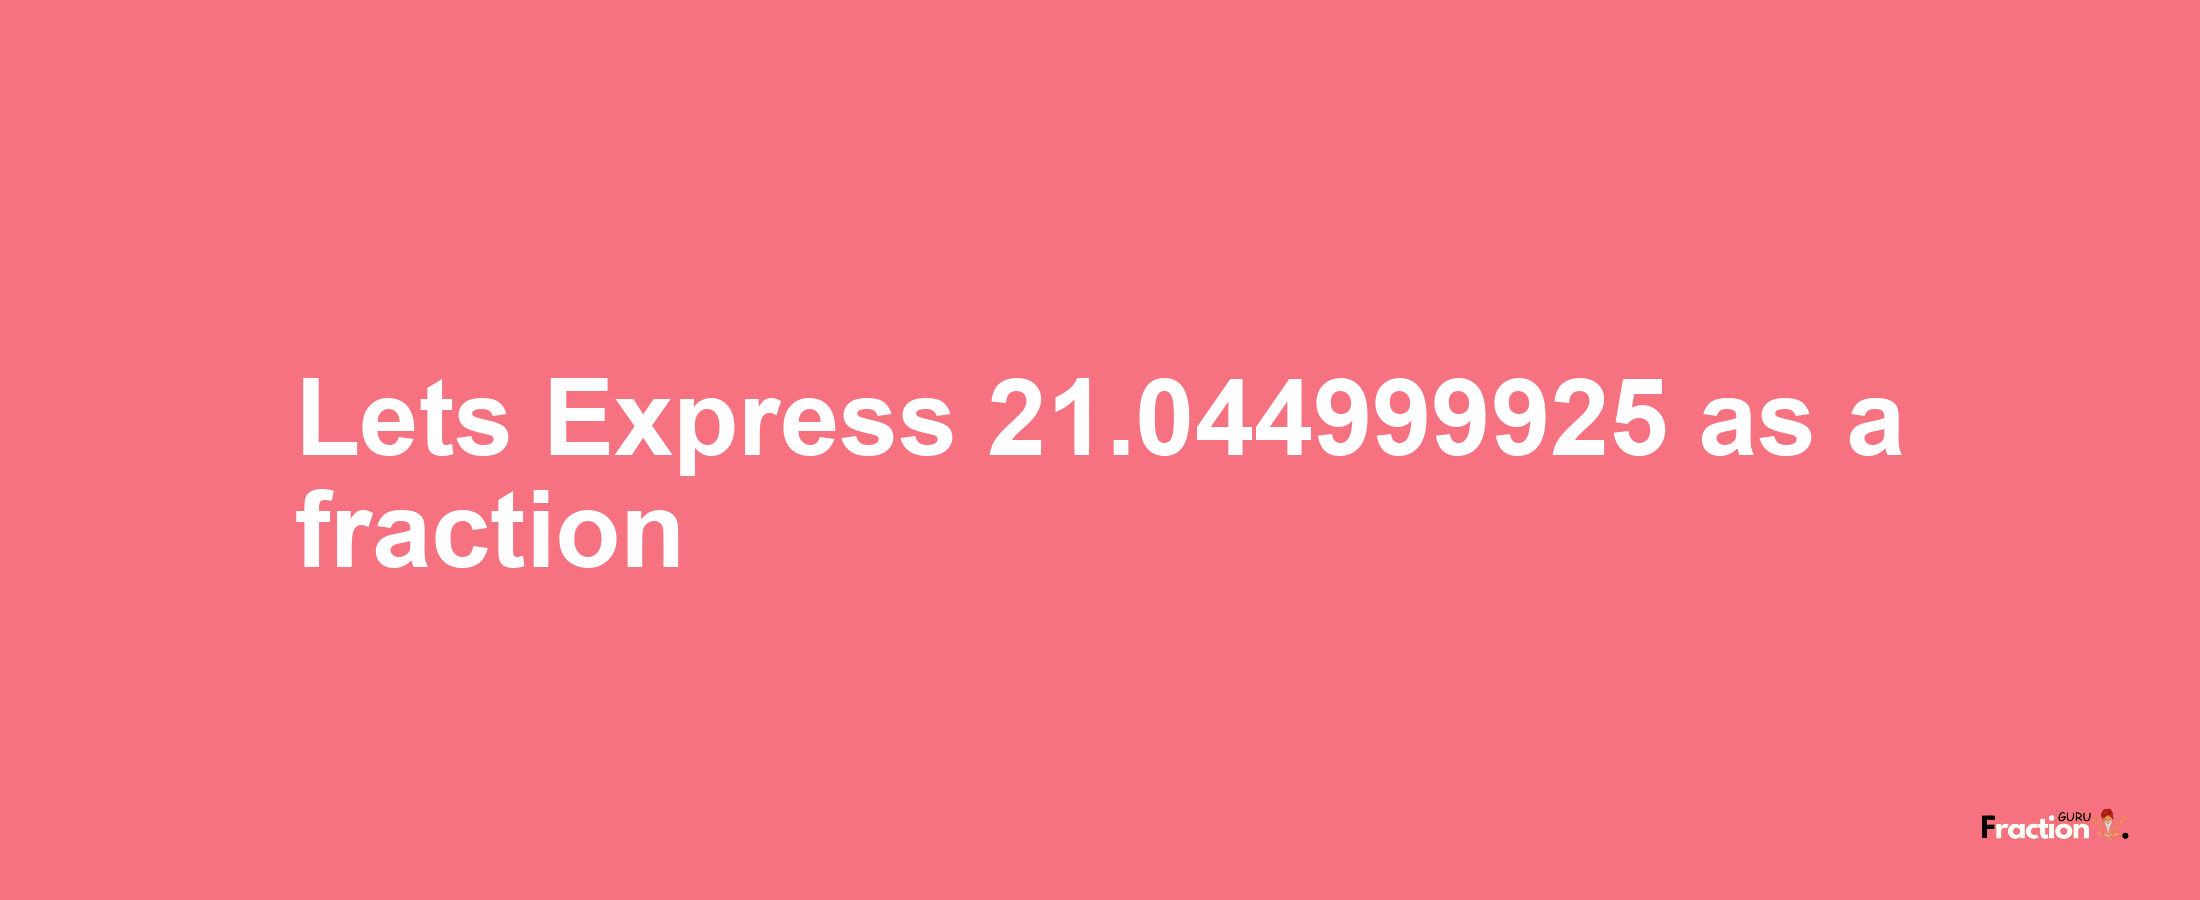 Lets Express 21.044999925 as afraction